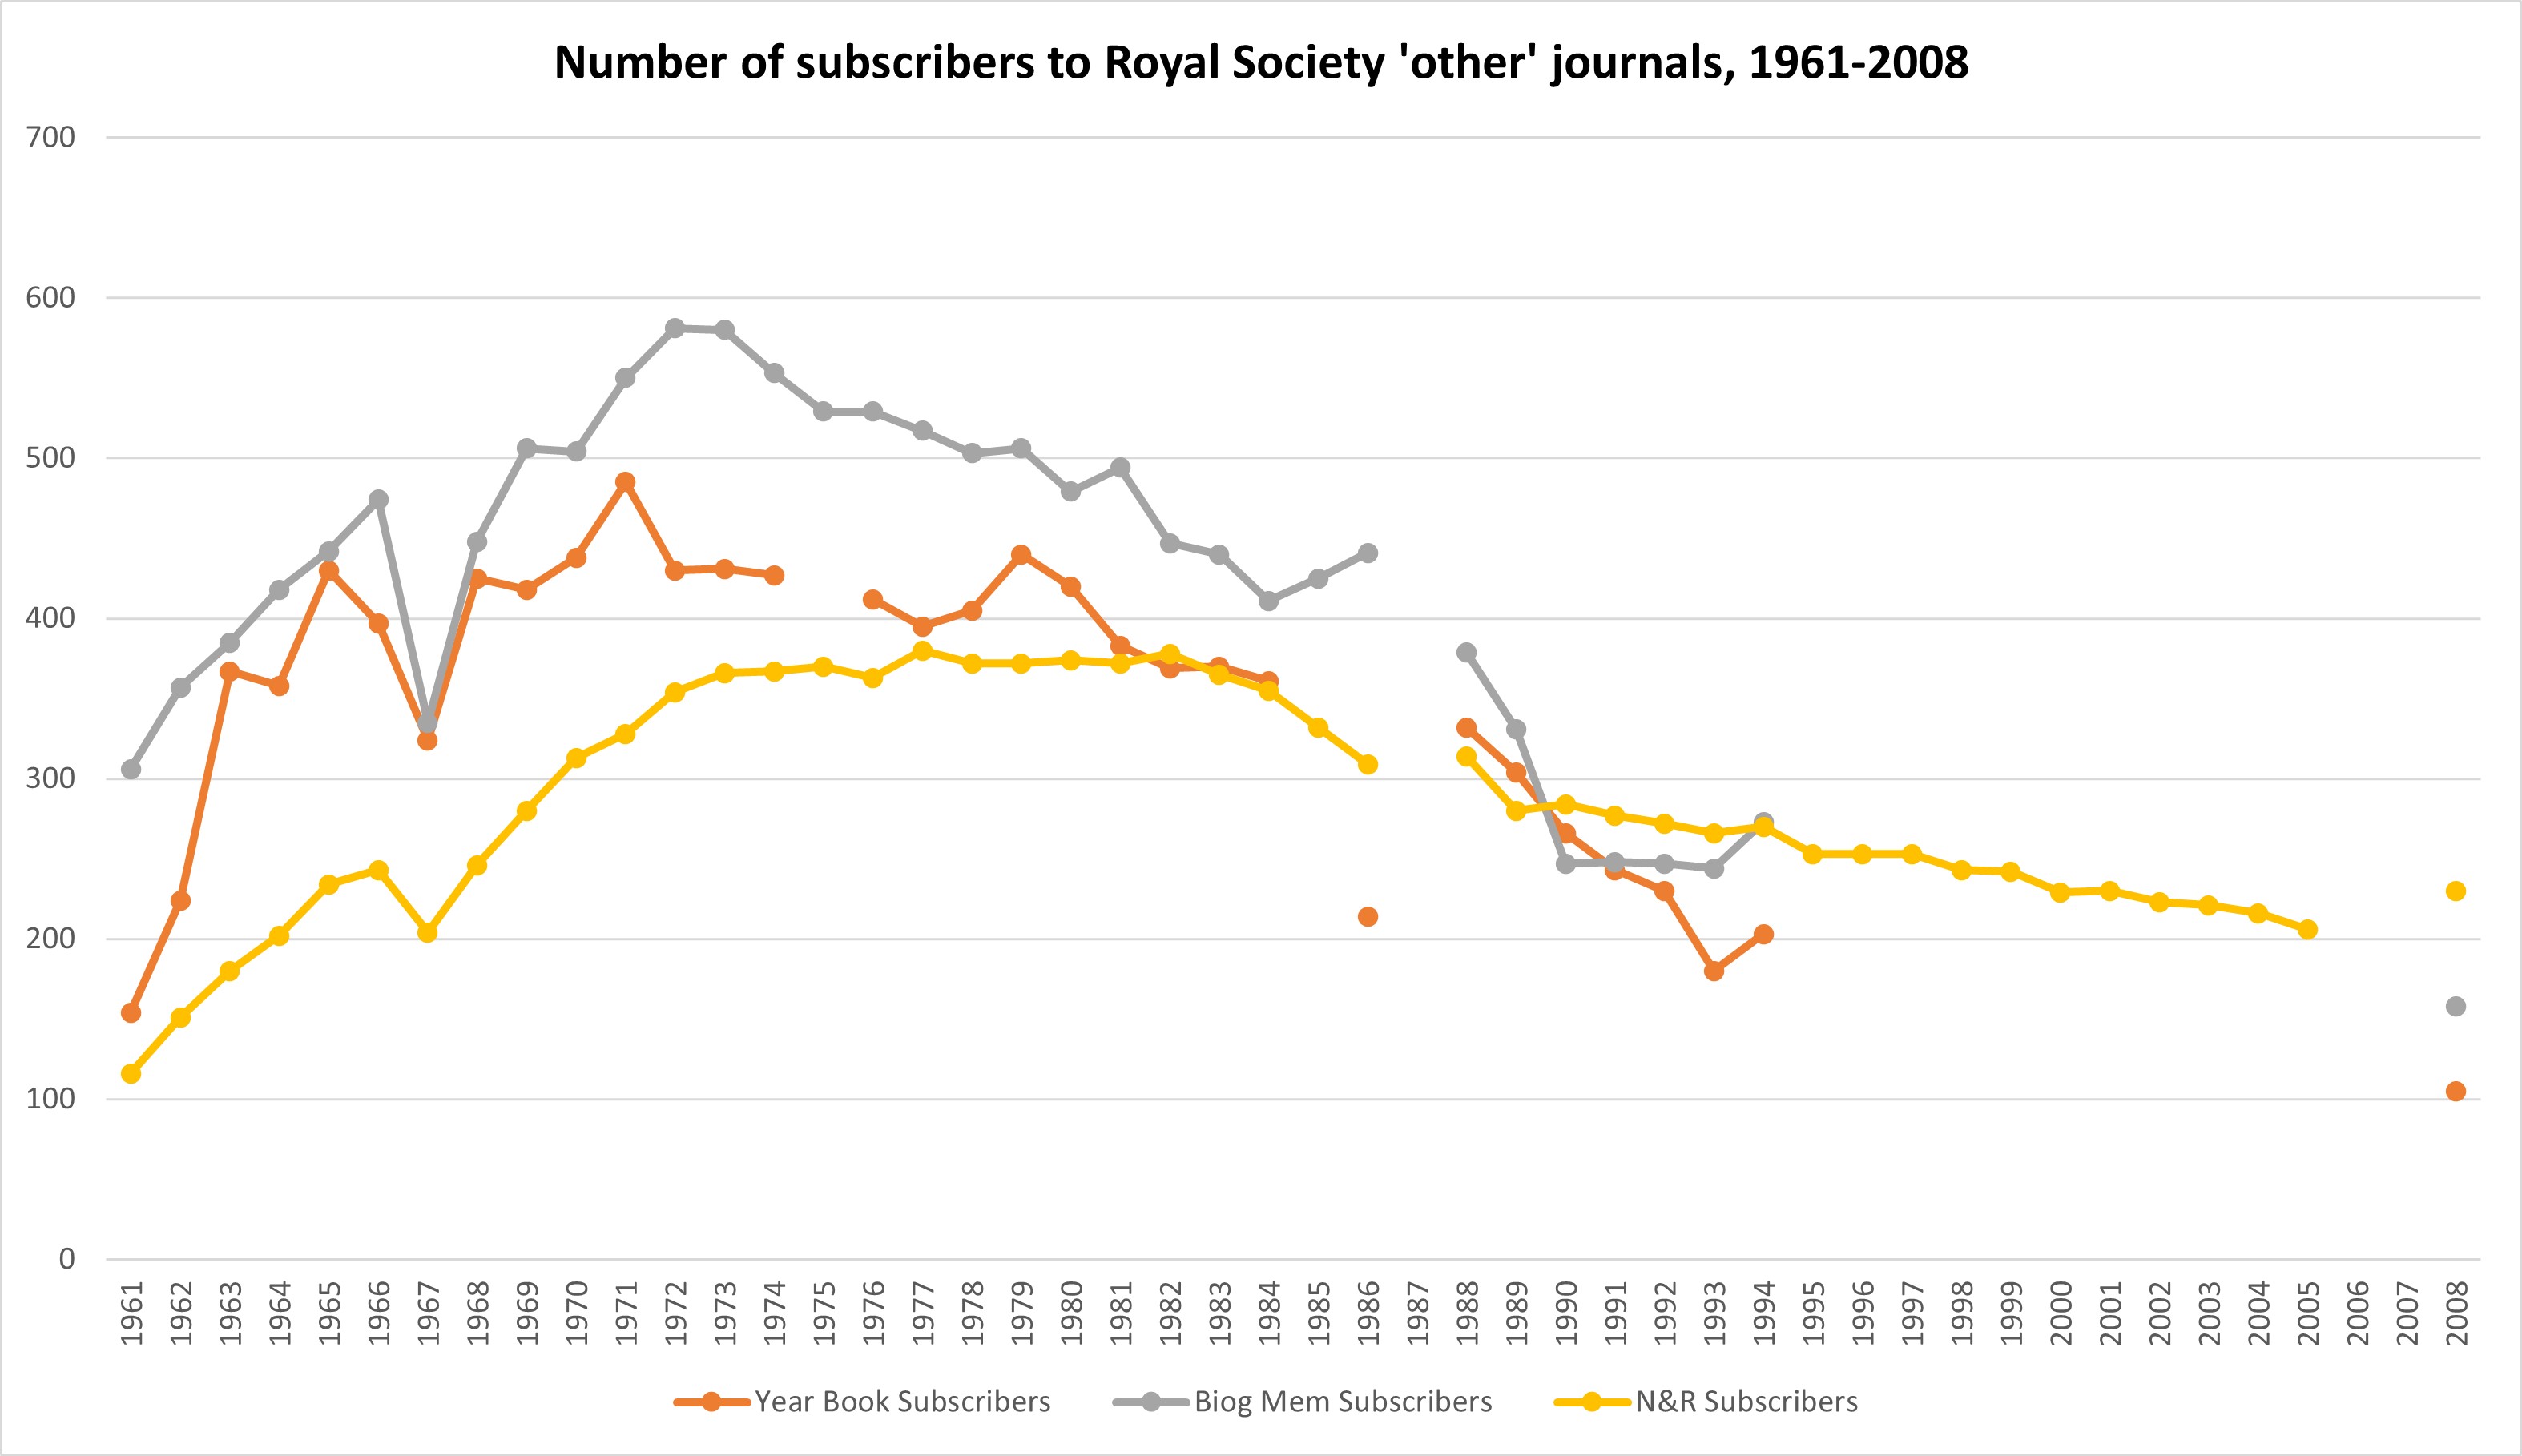 line graph showing circulation of Royal Society 'other journals', rising through the 1960s but declining after about 1970